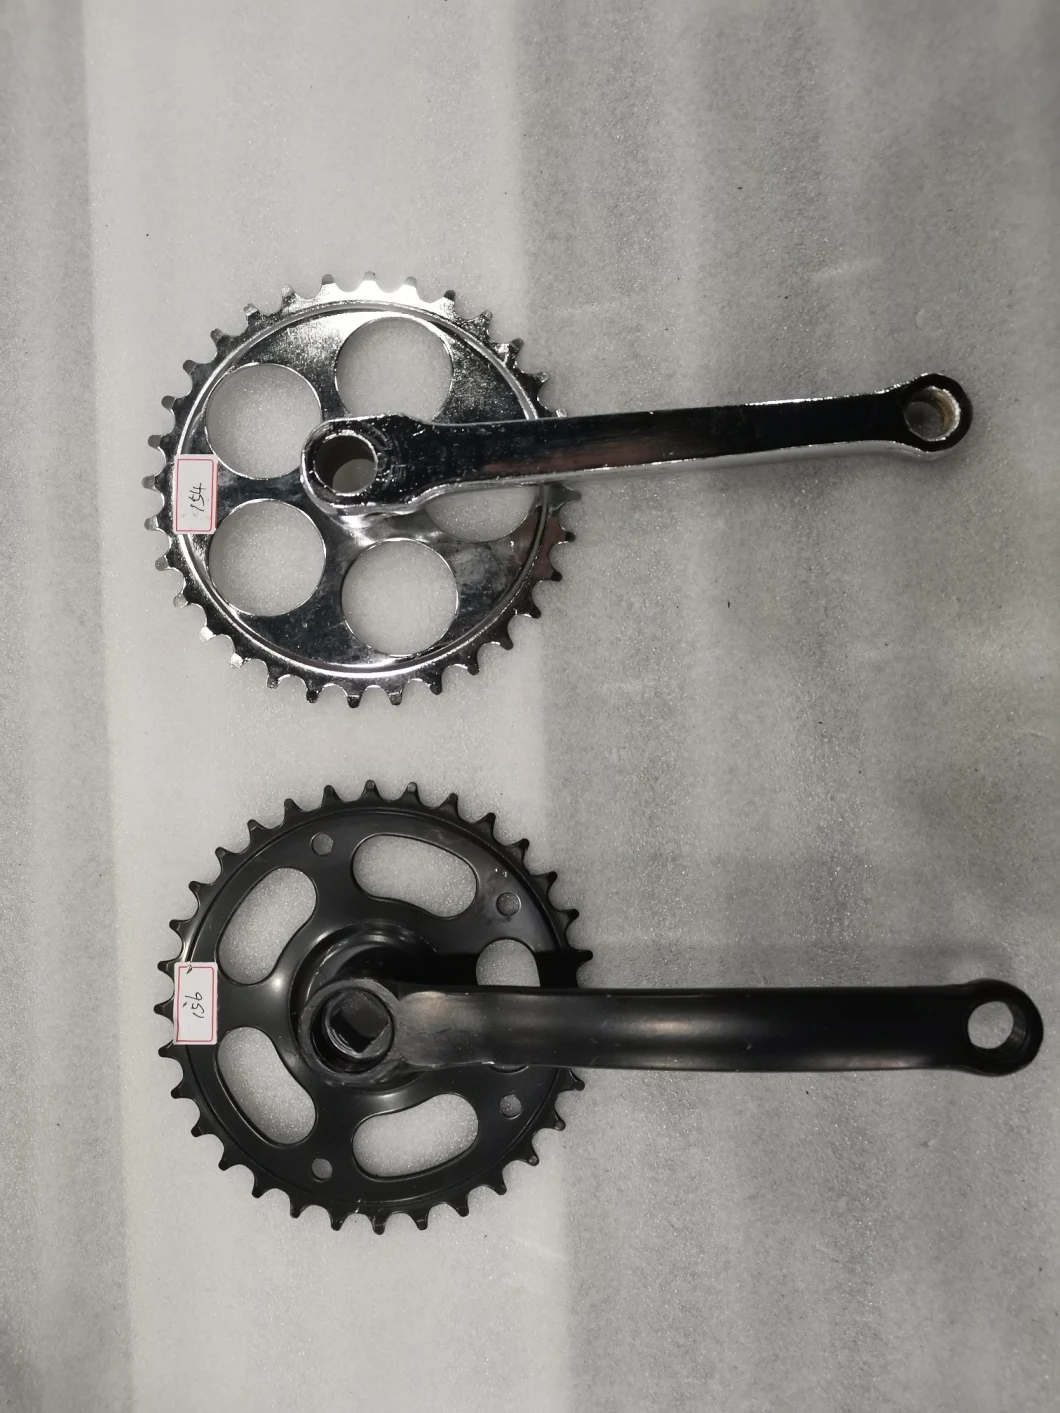 Bike Components Crank Chainwheel Cycle Parts Fixed Gear Bicycle Fixie Bicycle Crankset